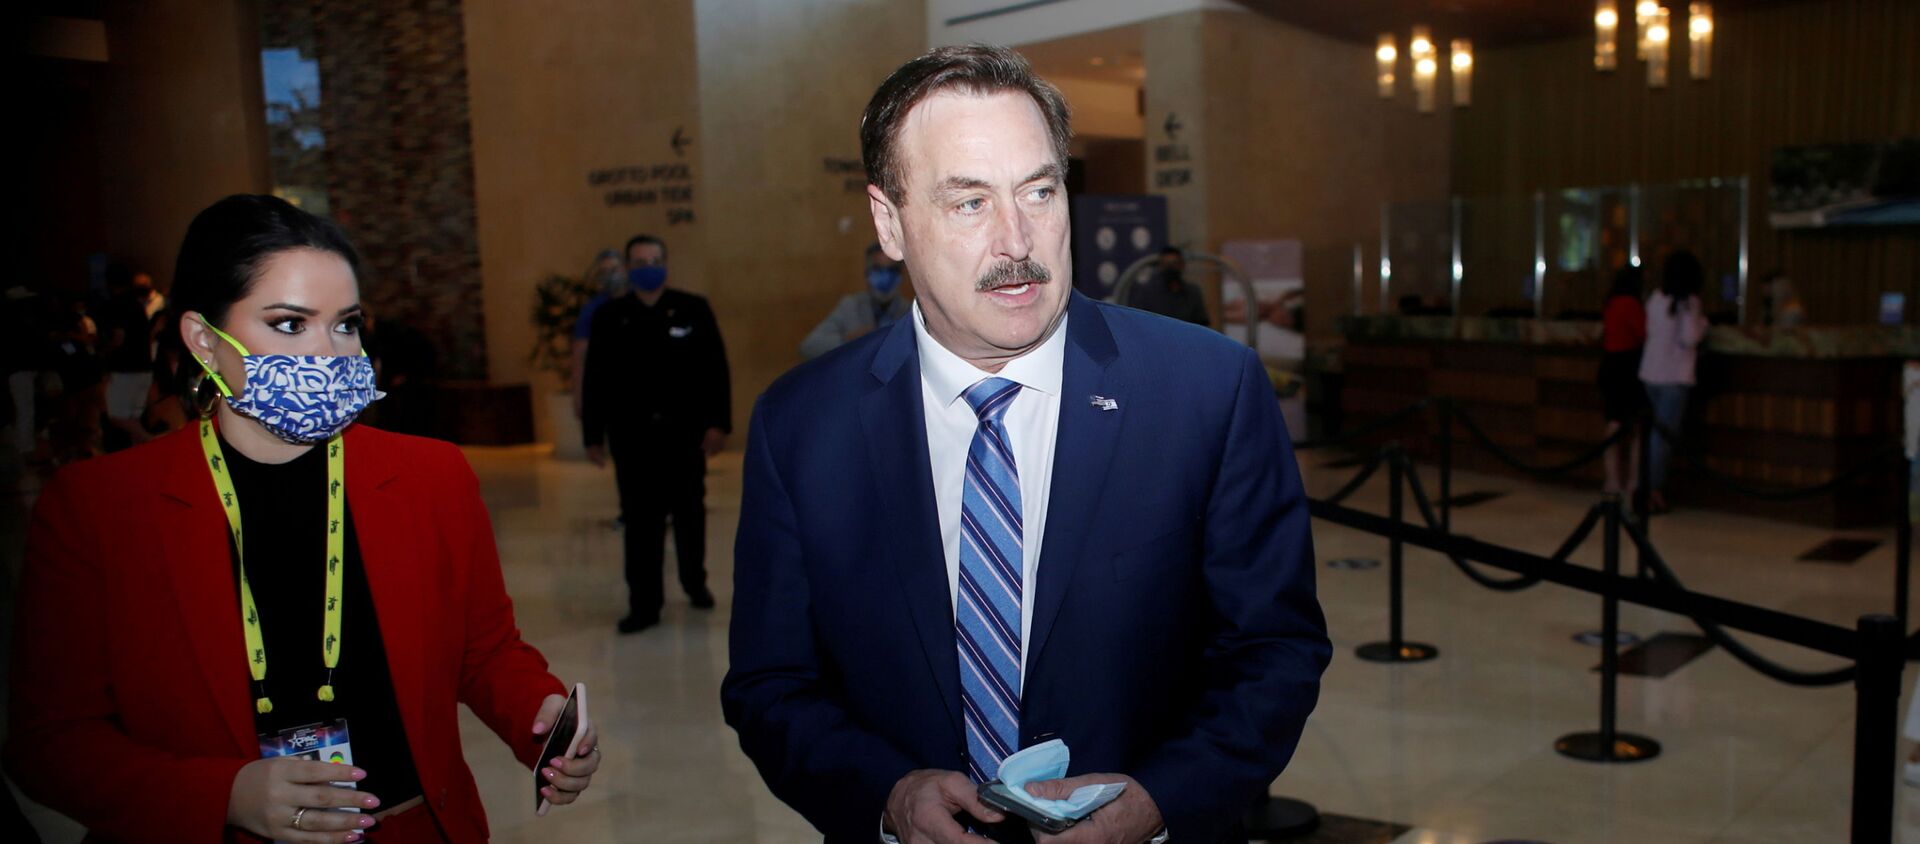 MyPillow Chief Executive Officer Mike Lindell walks through the Hyatt Regency lobby to attend the Conservative Political Action Conference (CPAC) in Orlando, Florida, U.S. February 28, 2021 - Sputnik International, 1920, 12.03.2021